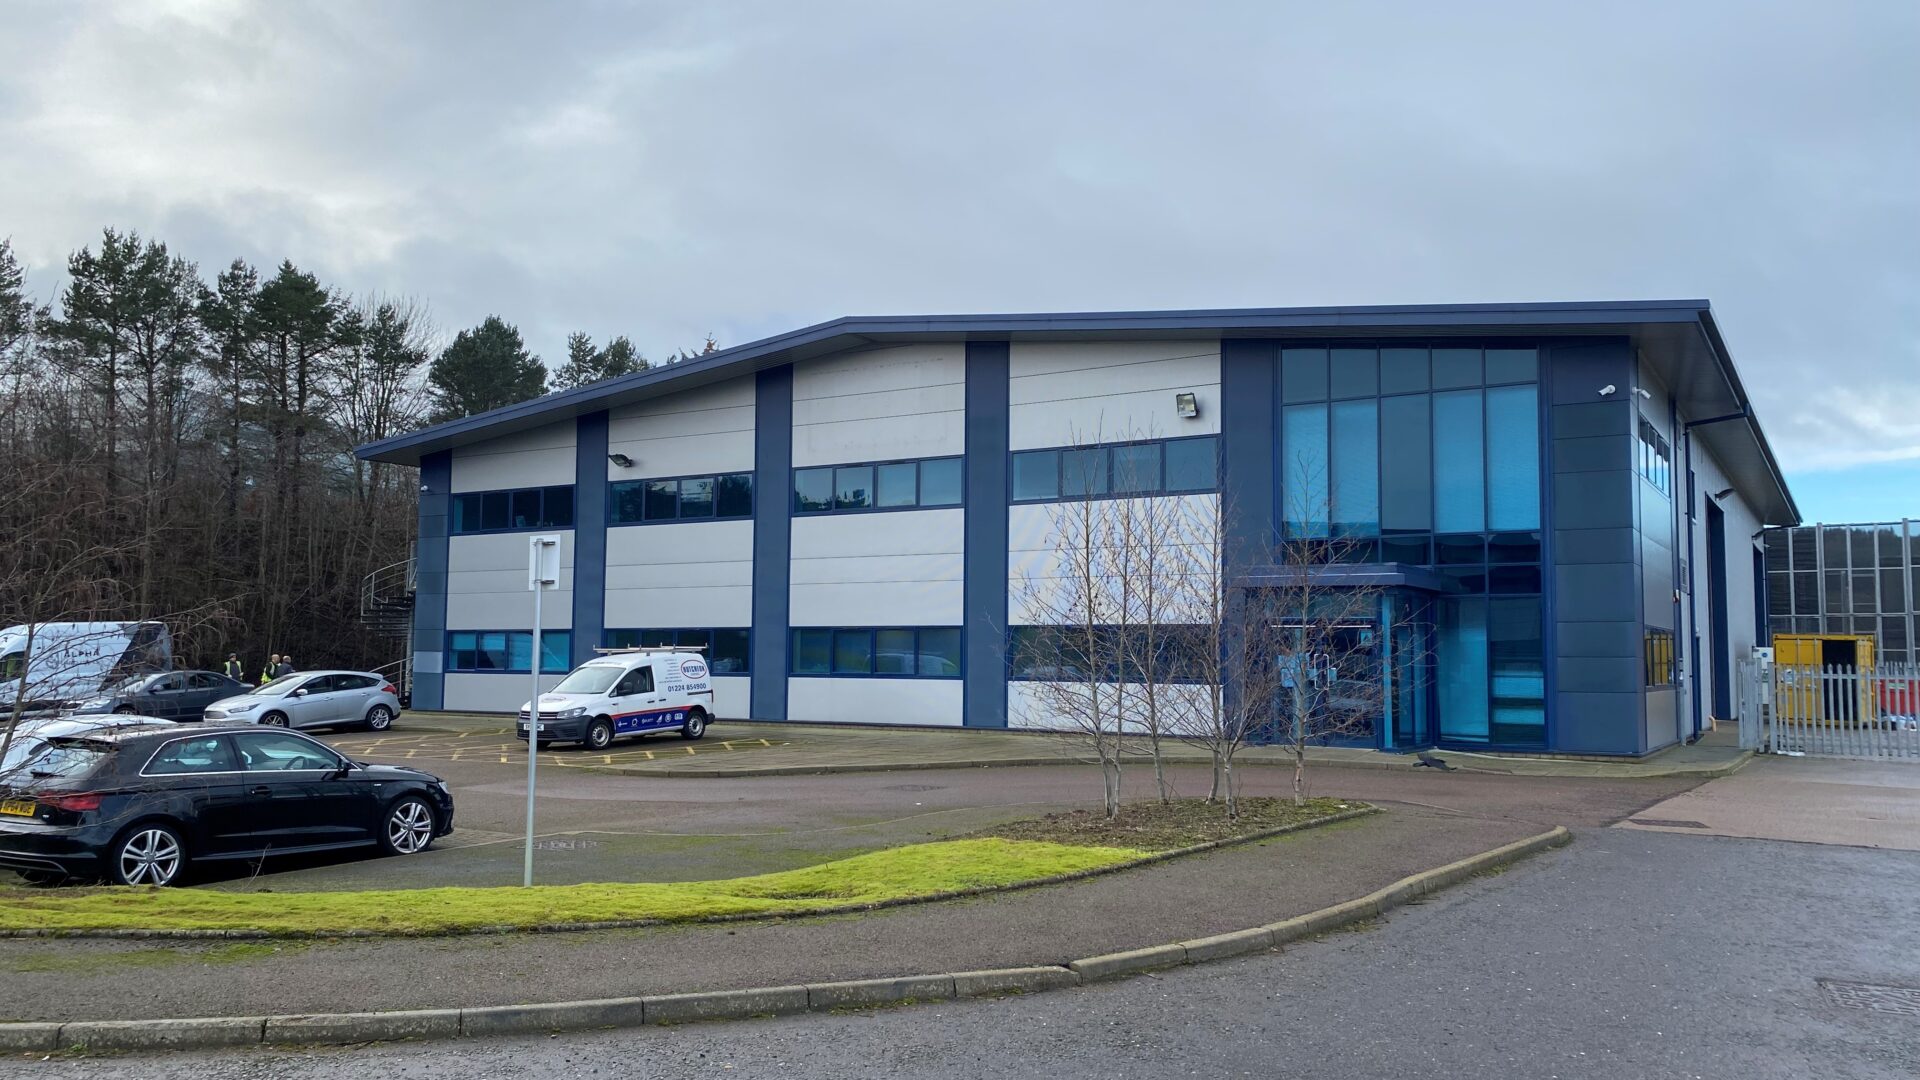 Shepherd secures sale of Duncan & Todd HQ in Aberdeen for £1.75M